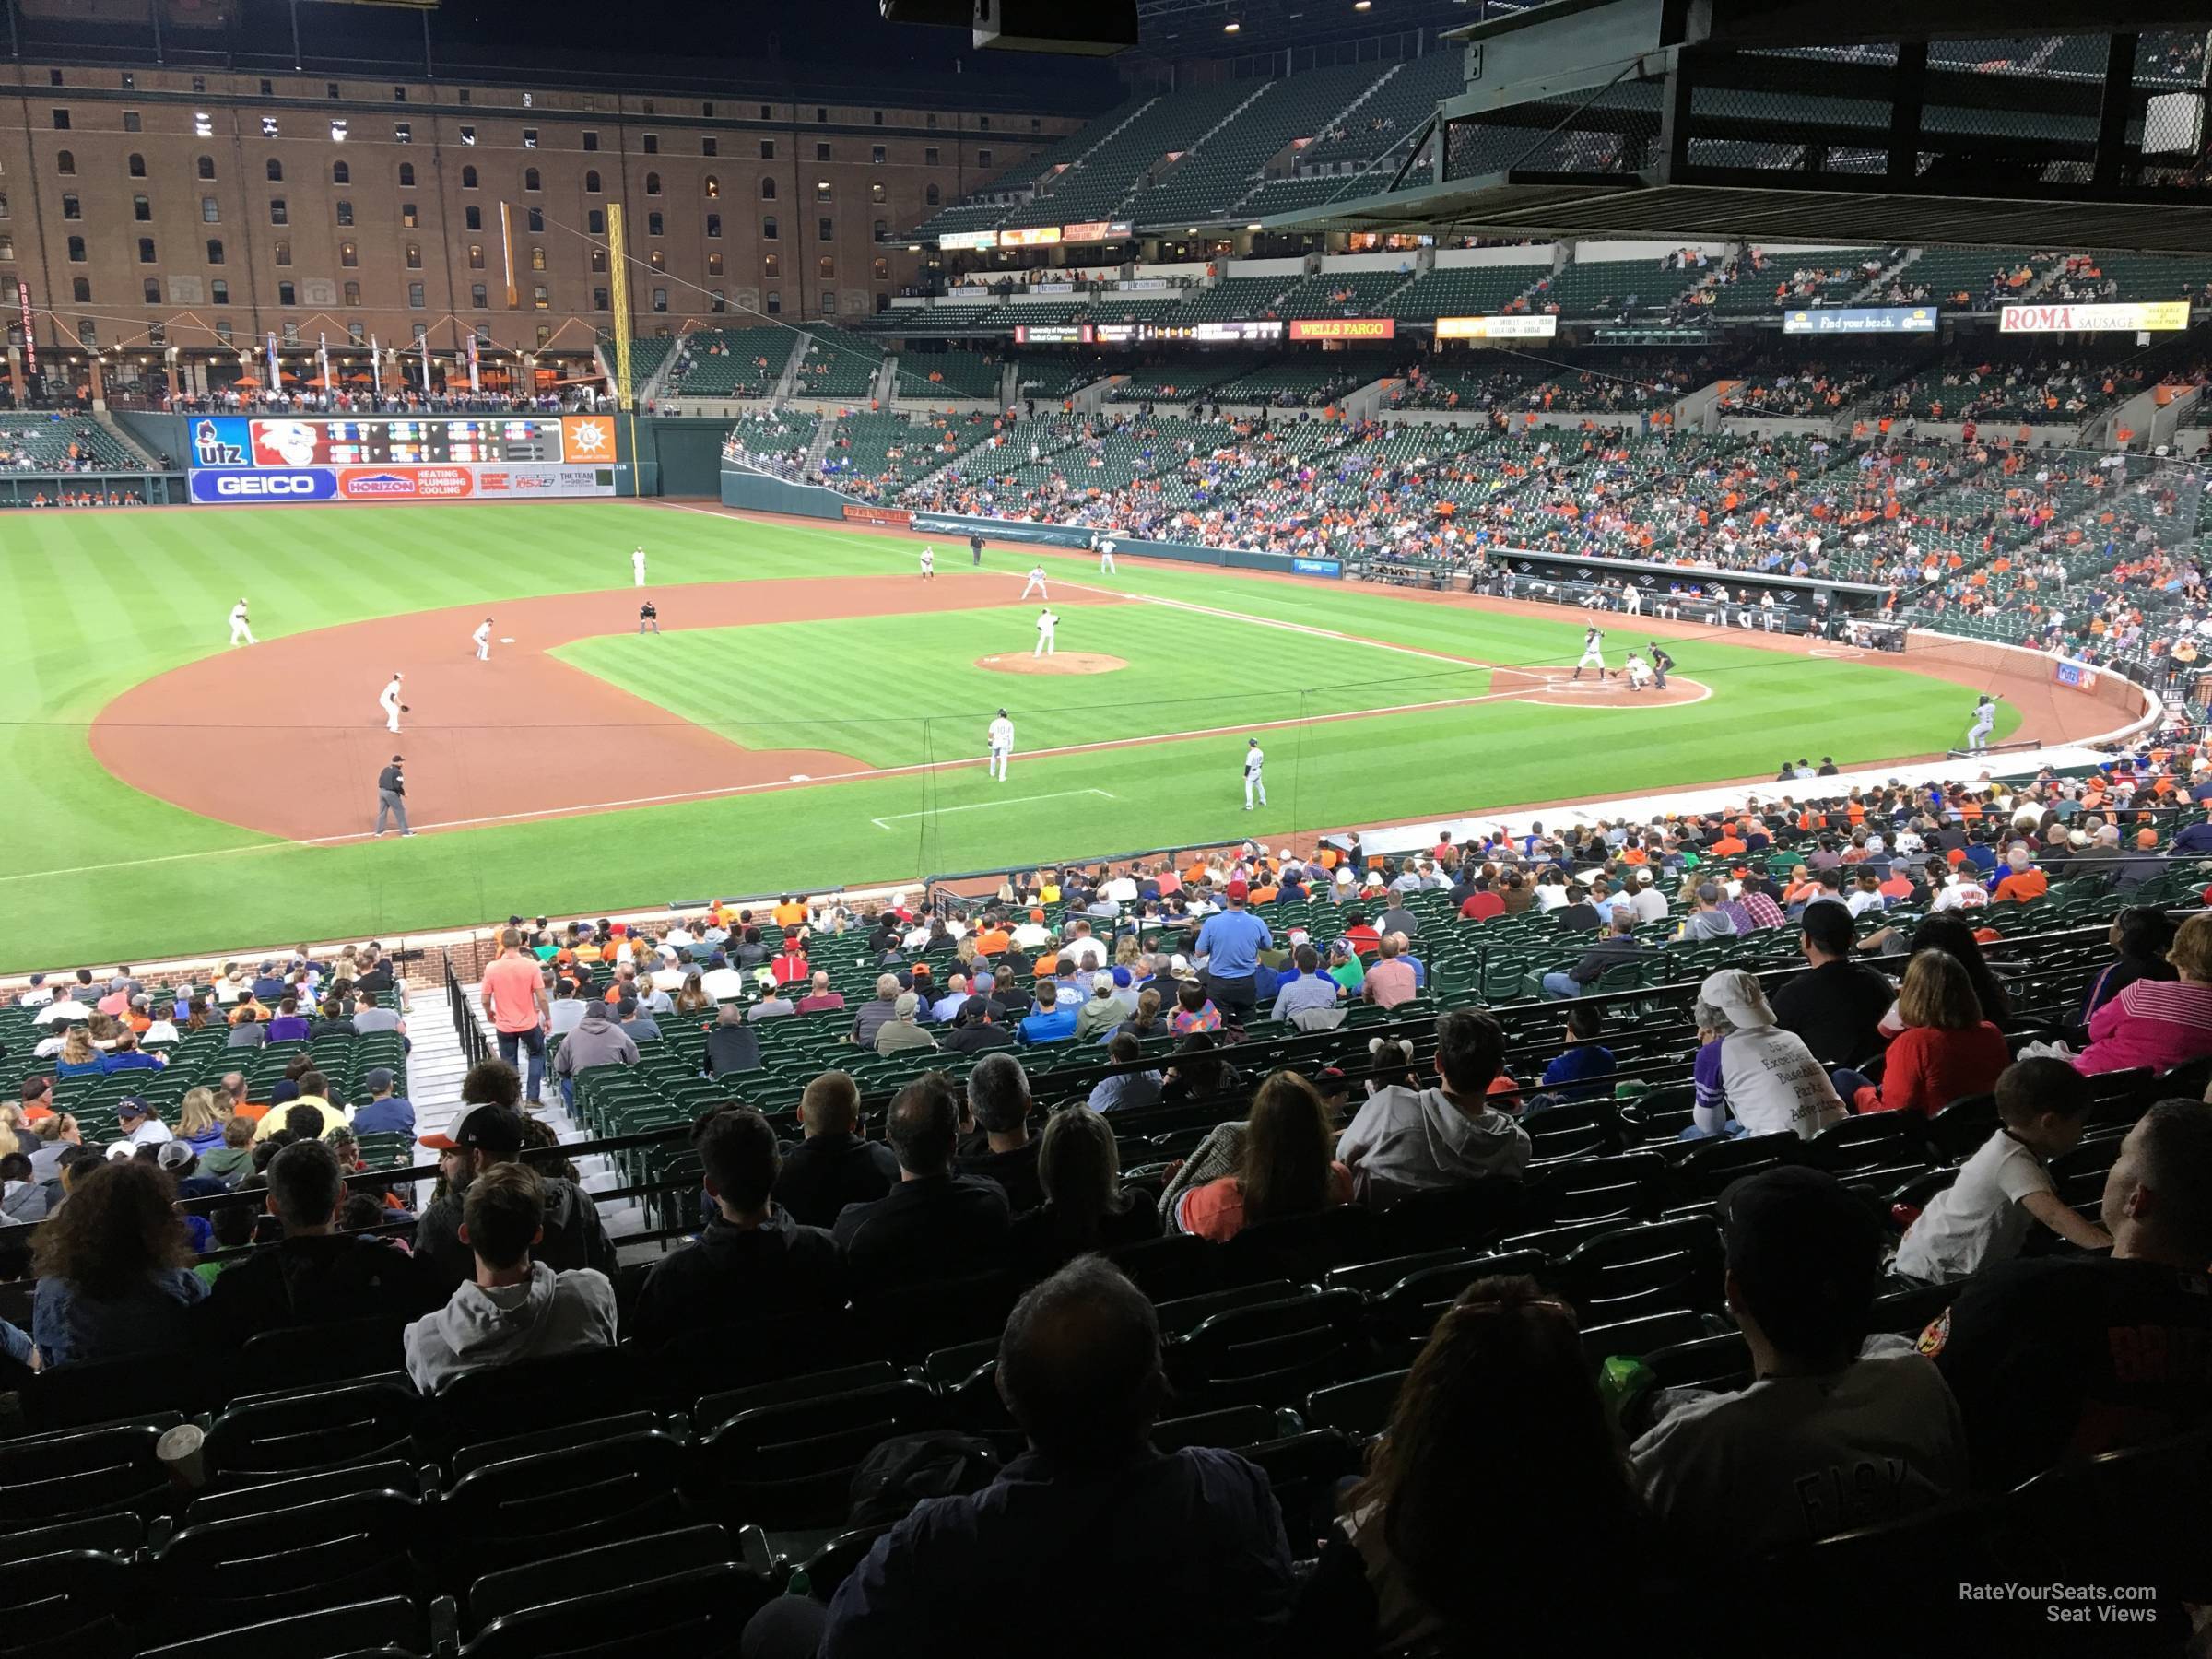 Section 55 at Oriole Park 